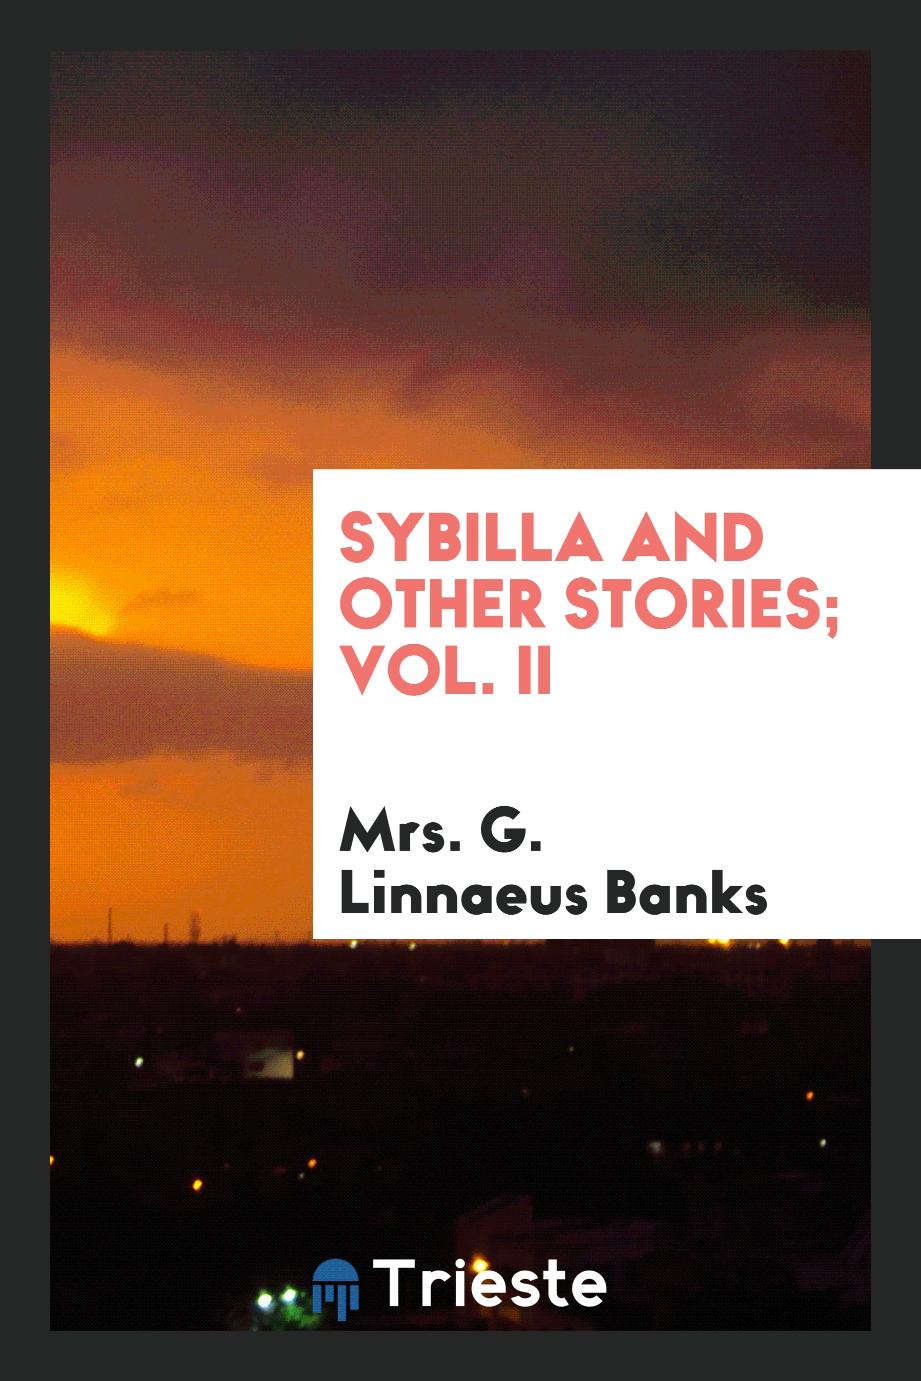 Sybilla and other stories; Vol. II